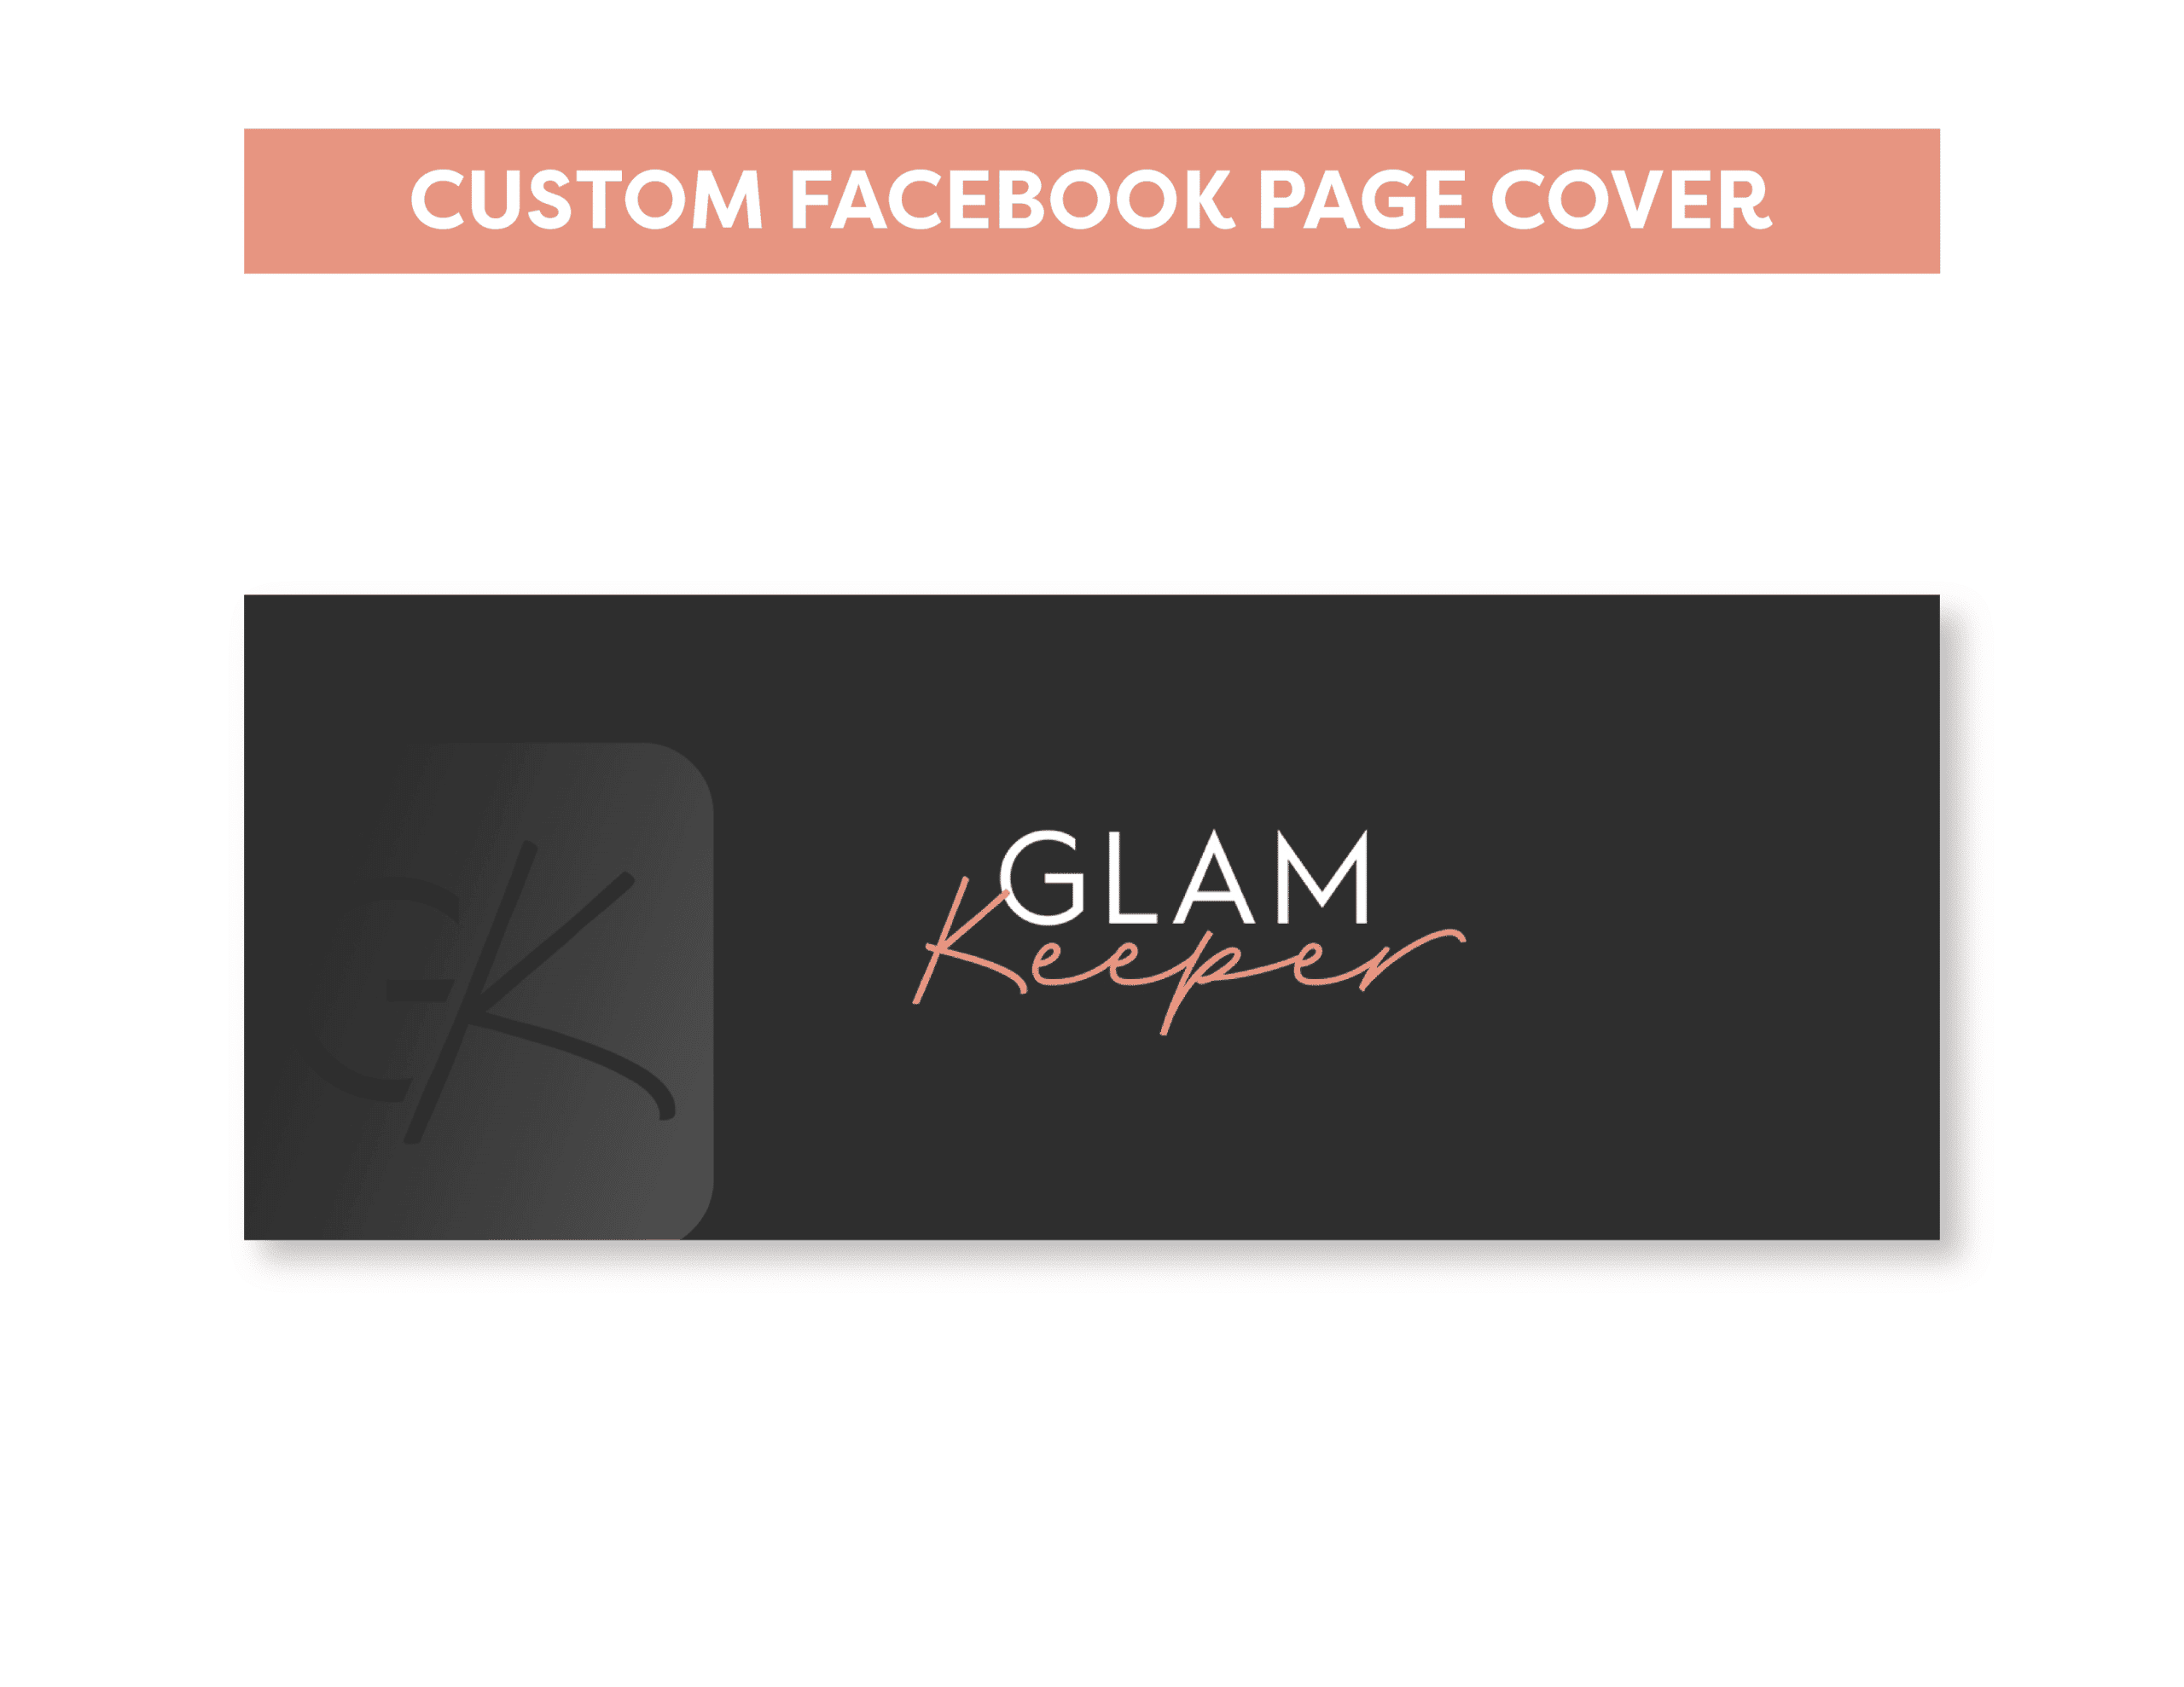 06Glam_Keeper__Custom Facebook Page Cover